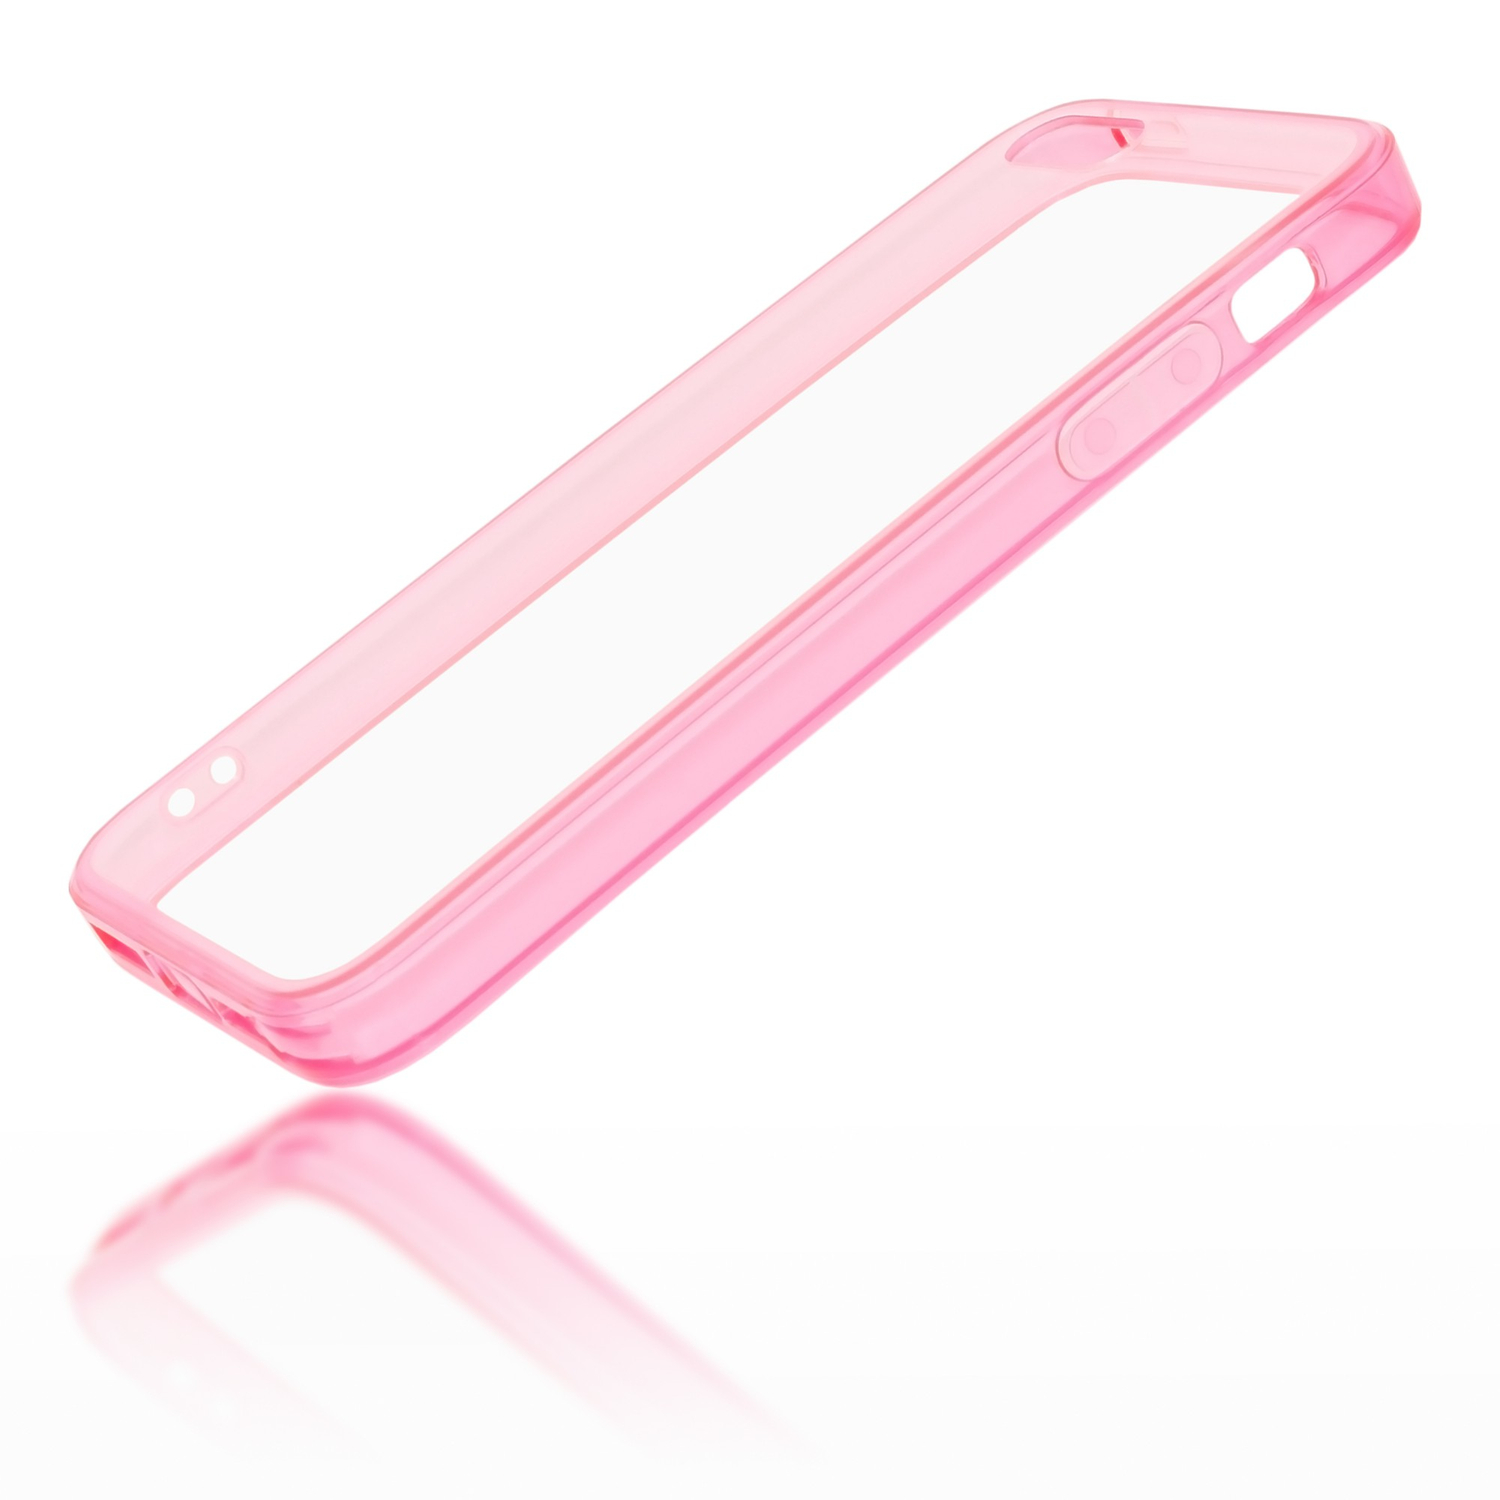 iPhone 5s, iPhone Apple, Backcover, (1. Pink Klare Generation) NALIA iPhone 5 SE Hülle,